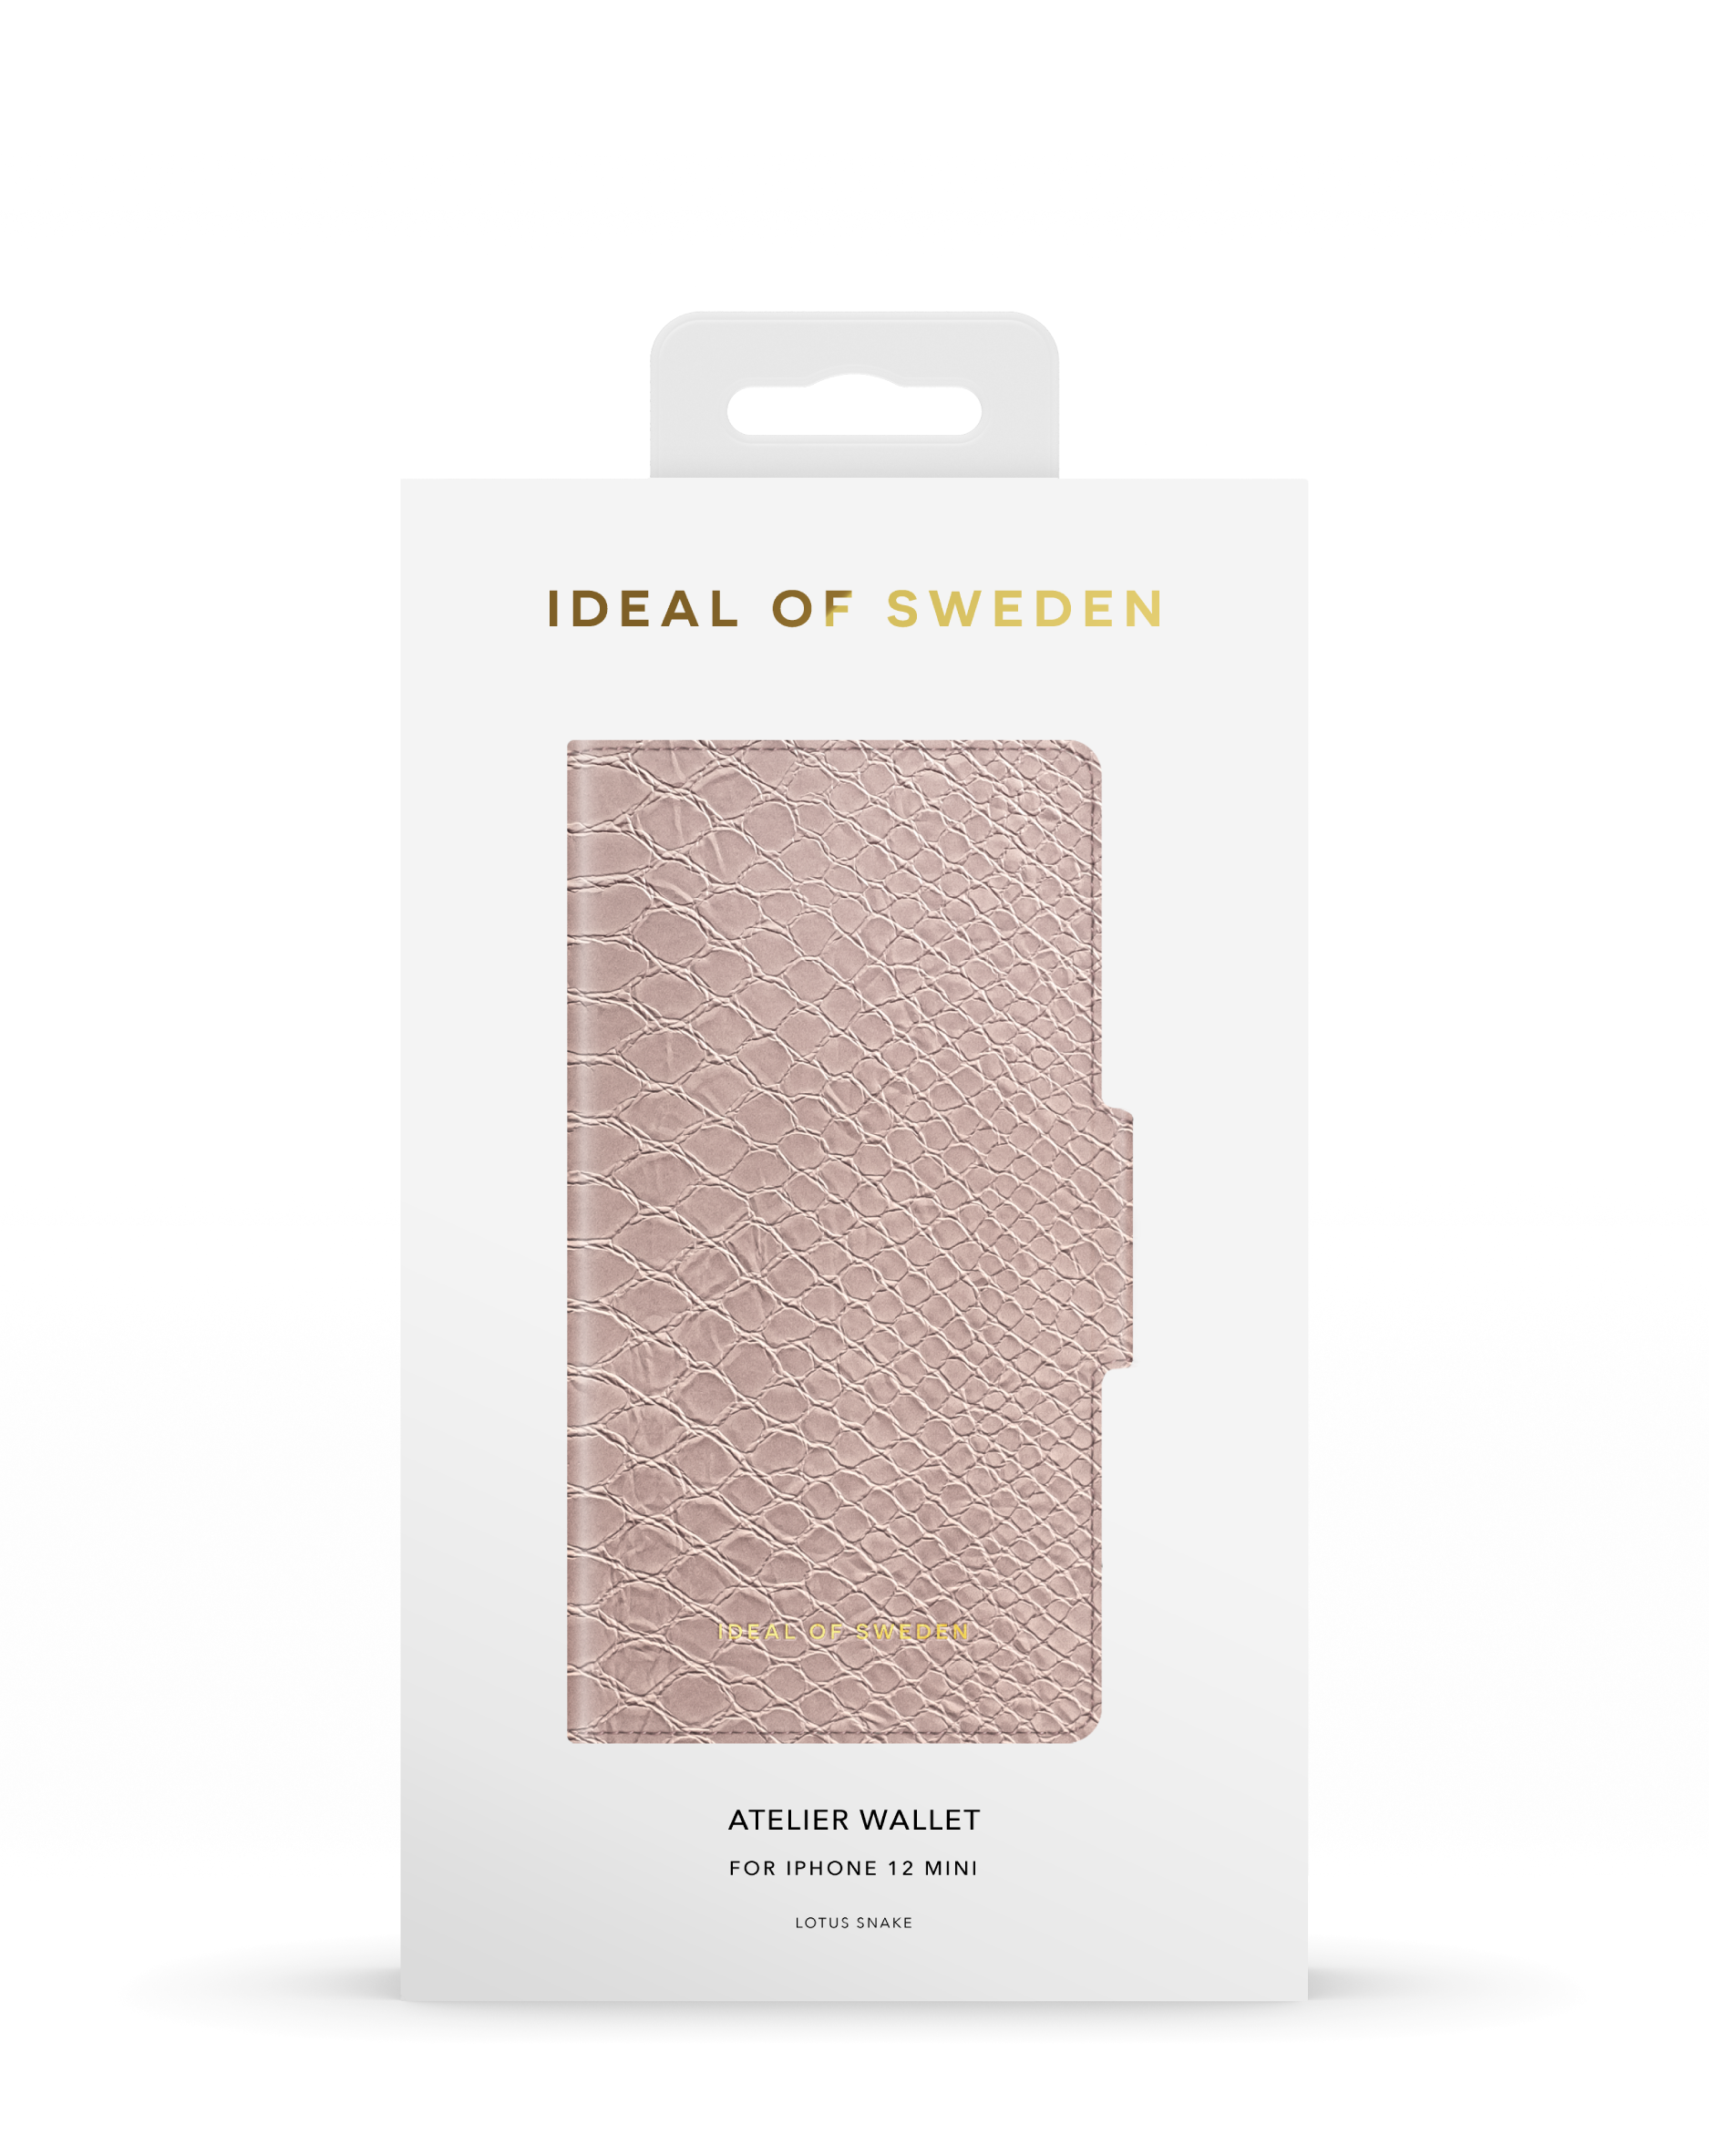 IDEAL OF SWEDEN IDAW-I2054-234, IPhone Lotus Bookcover, mini, Apple, 12 Snake